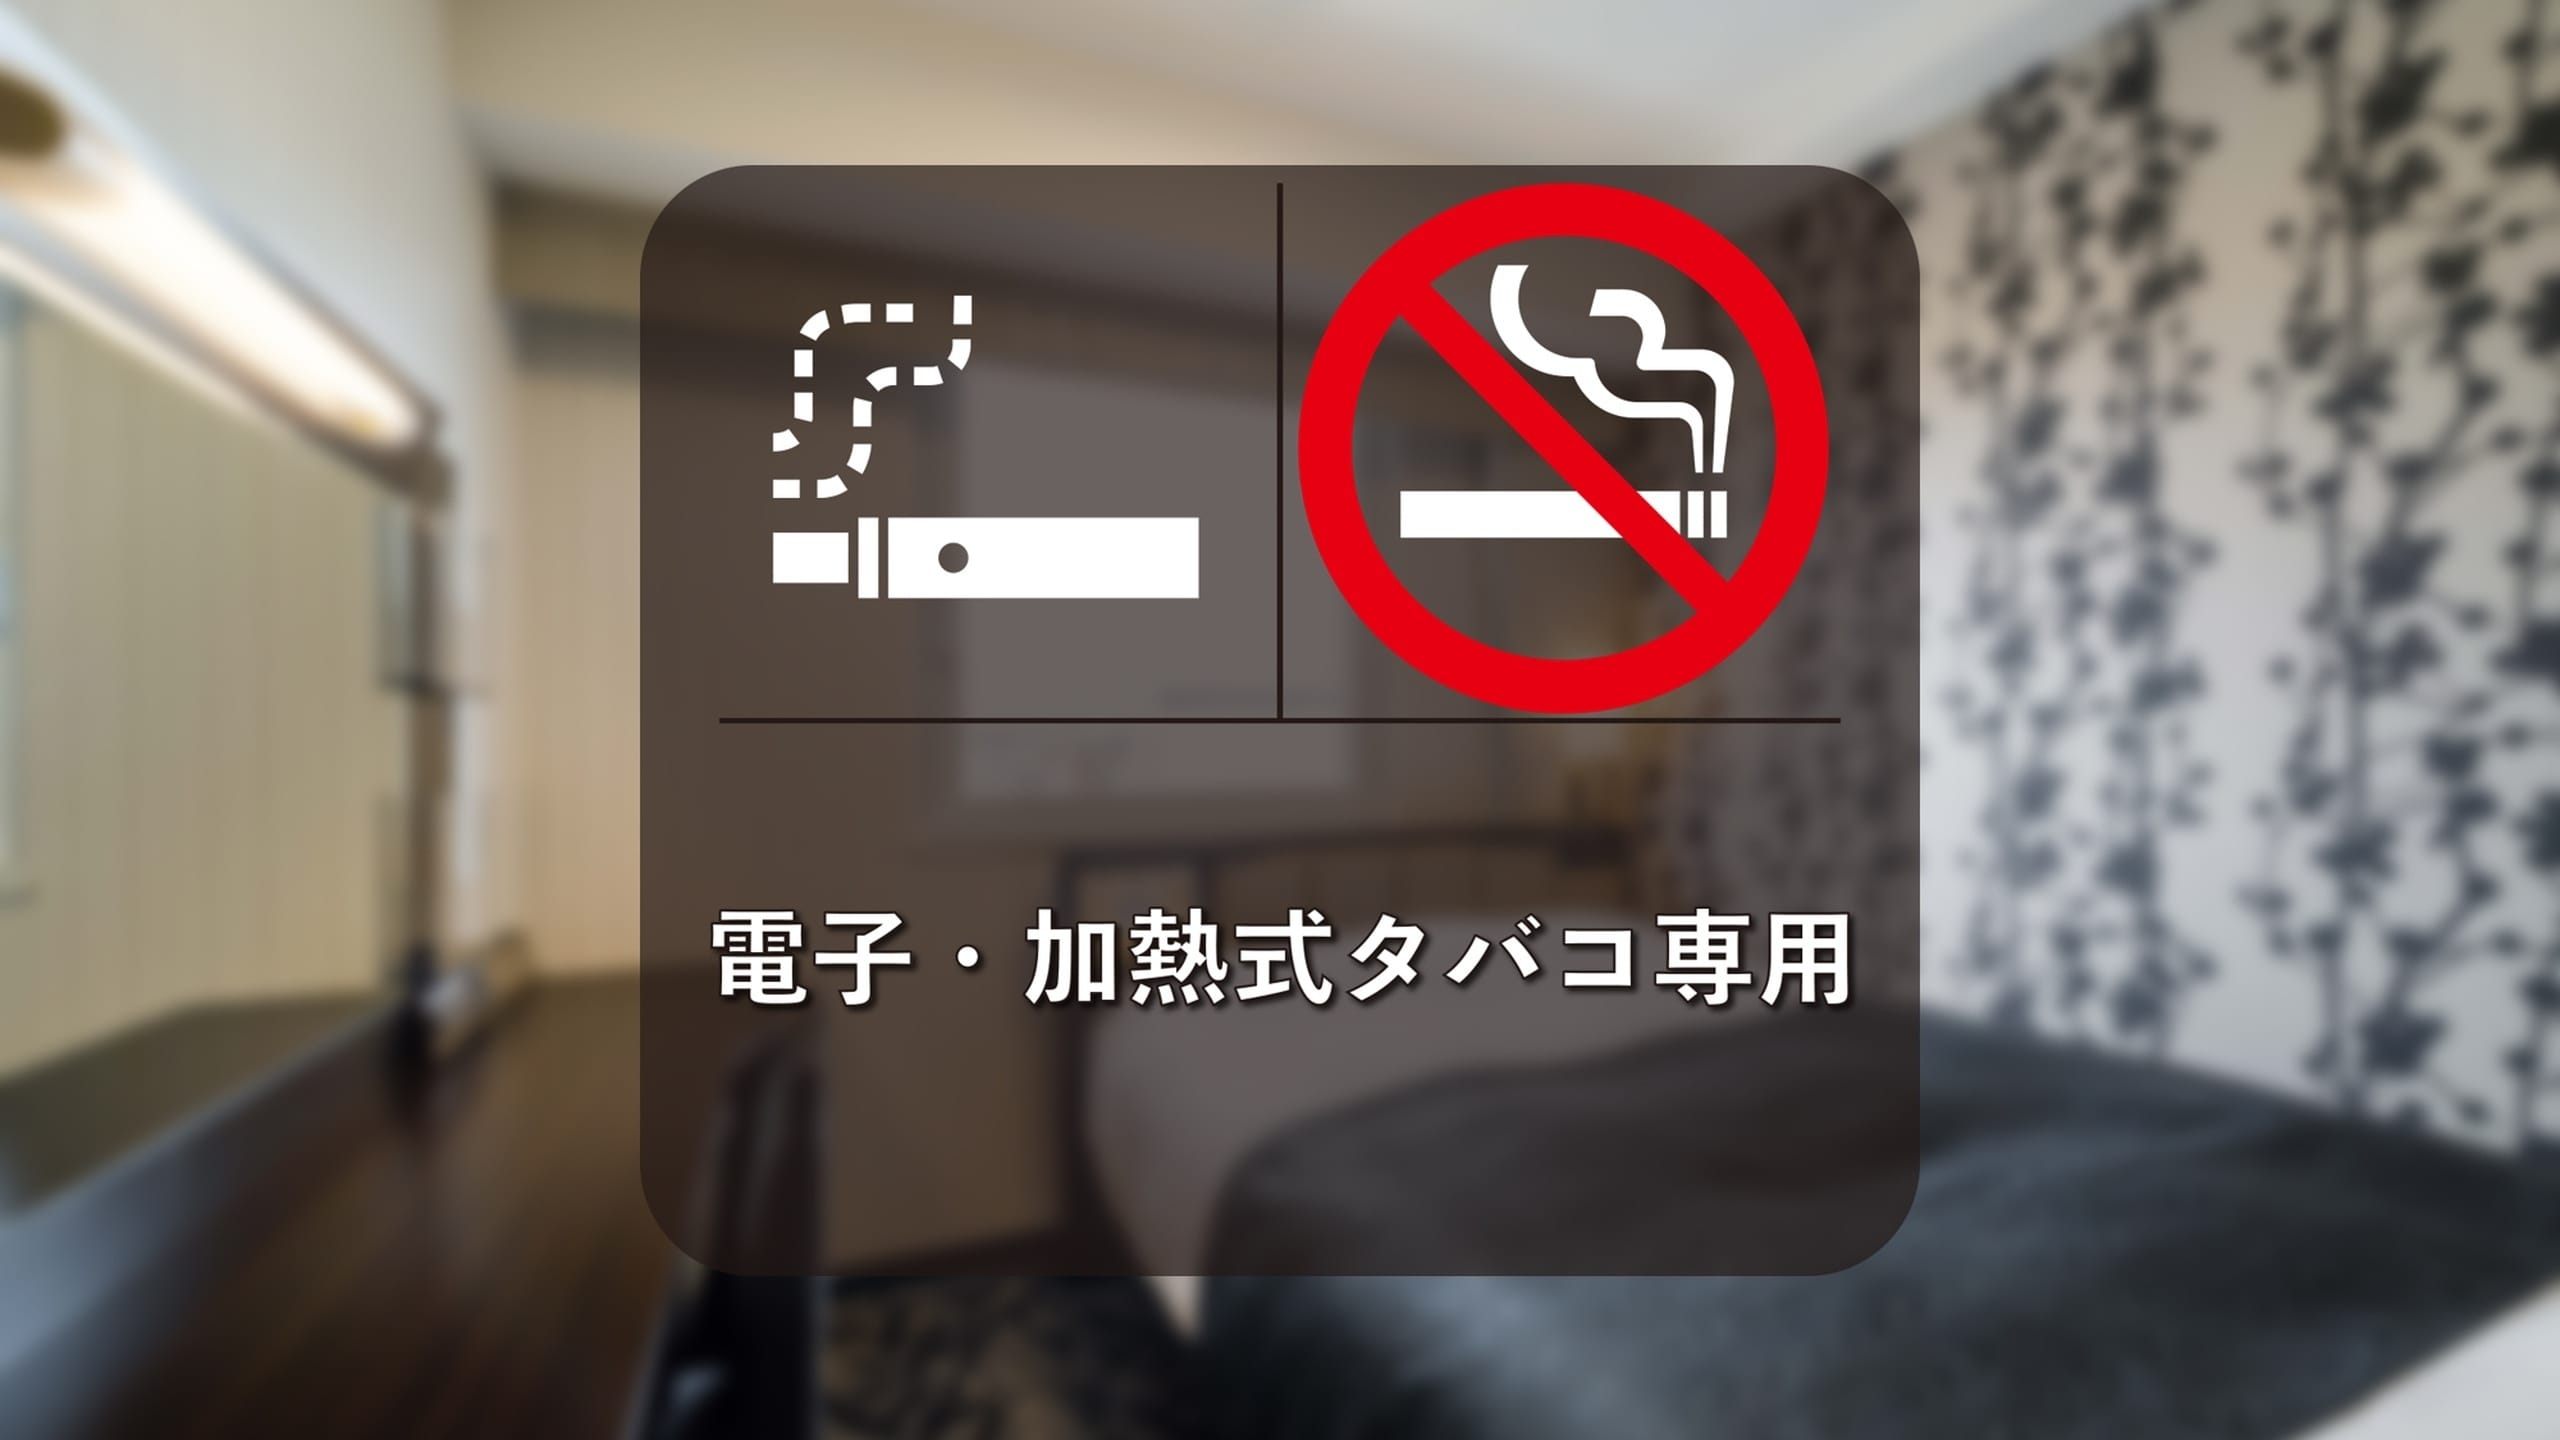 Electronic cigarette only (old)